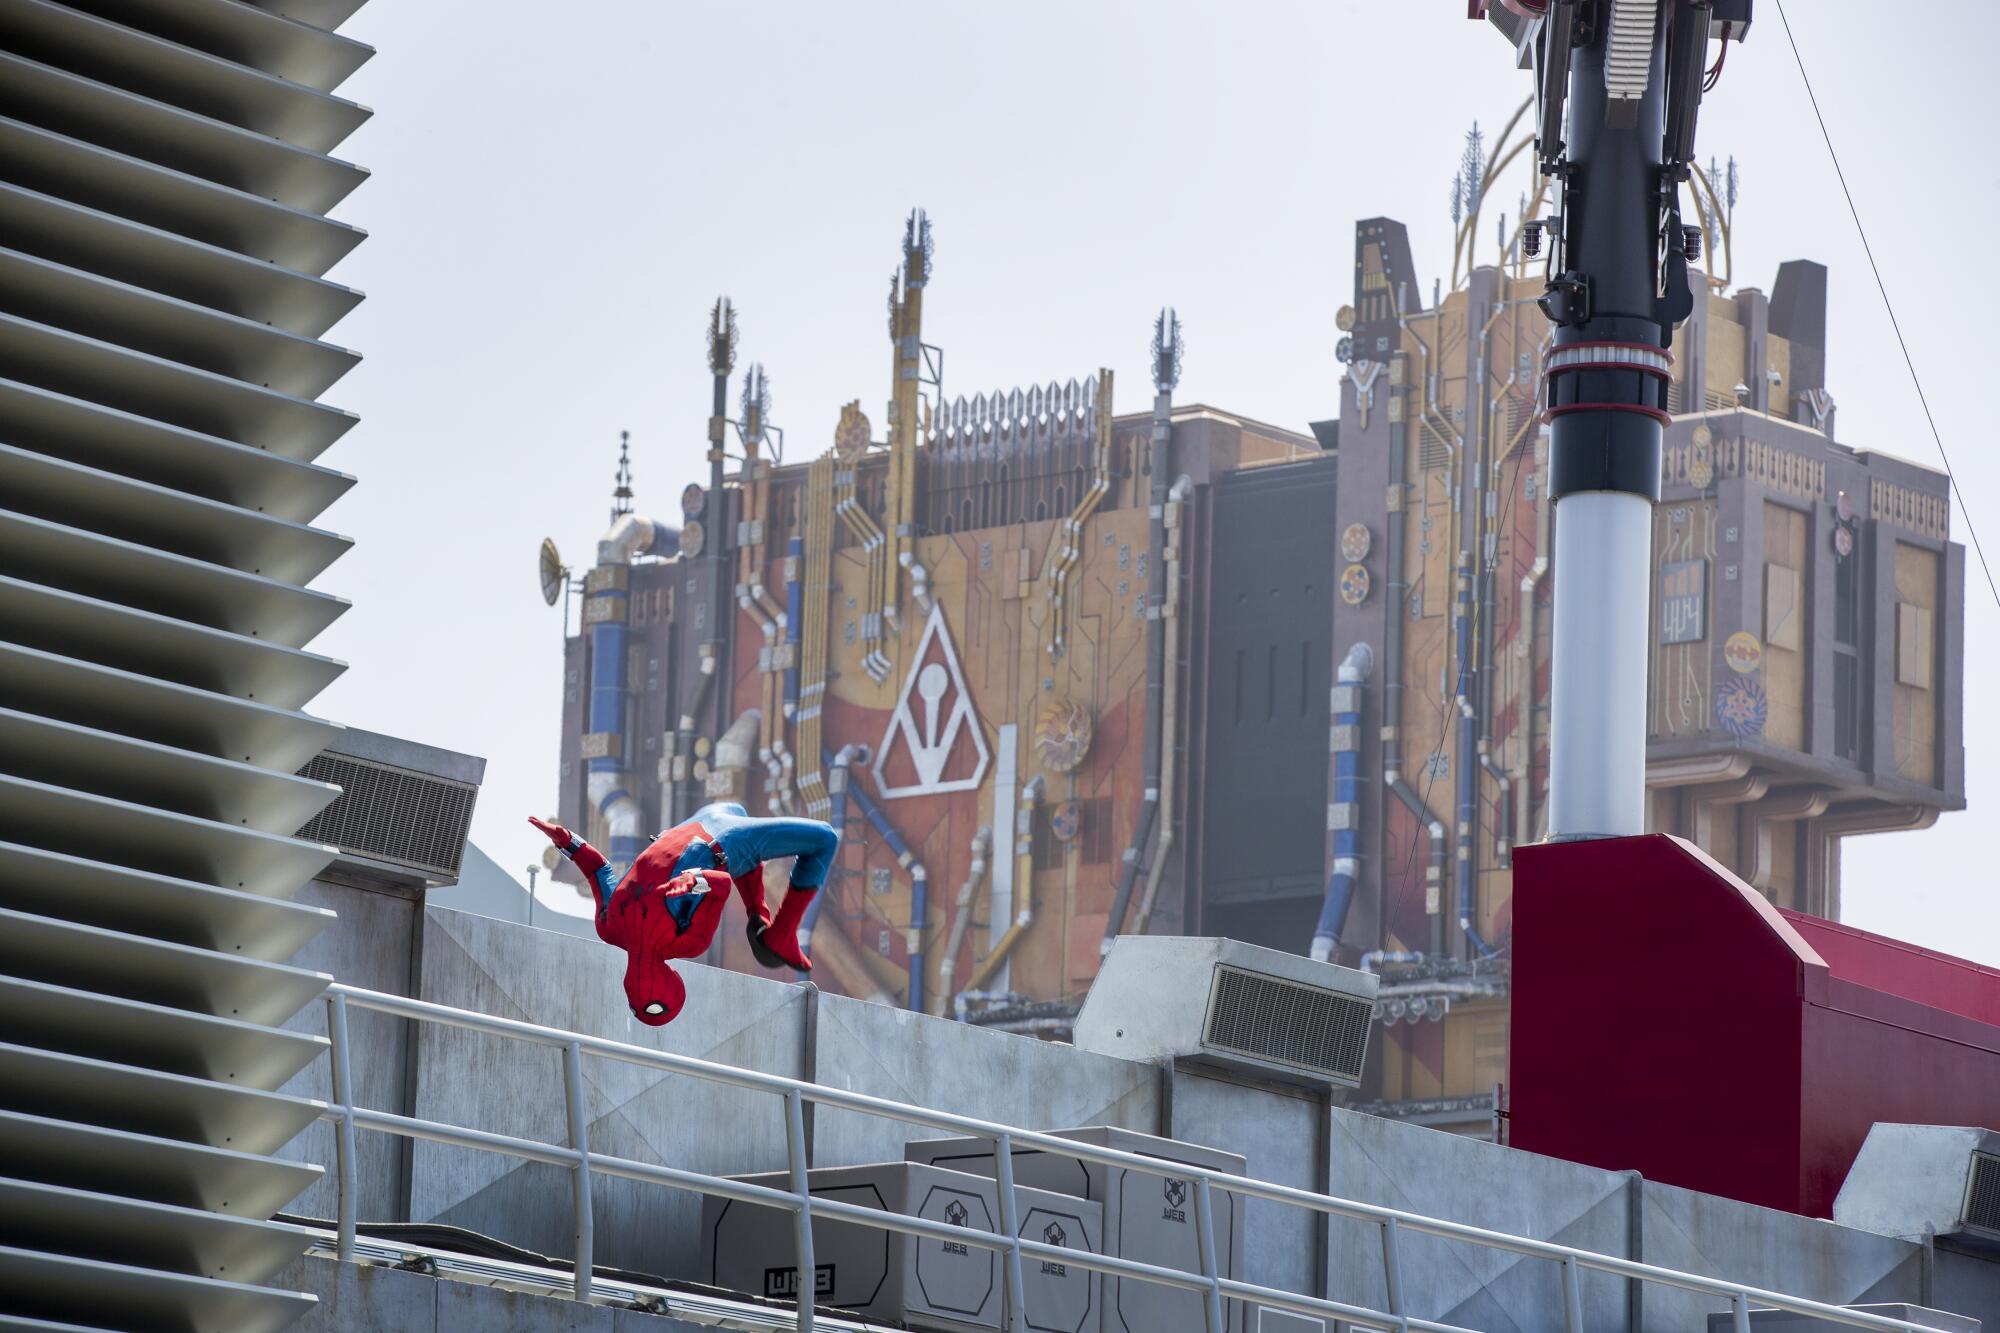 Spider-Man does a back flip while performing at Web Slingers: A Spider-Man Adventure 